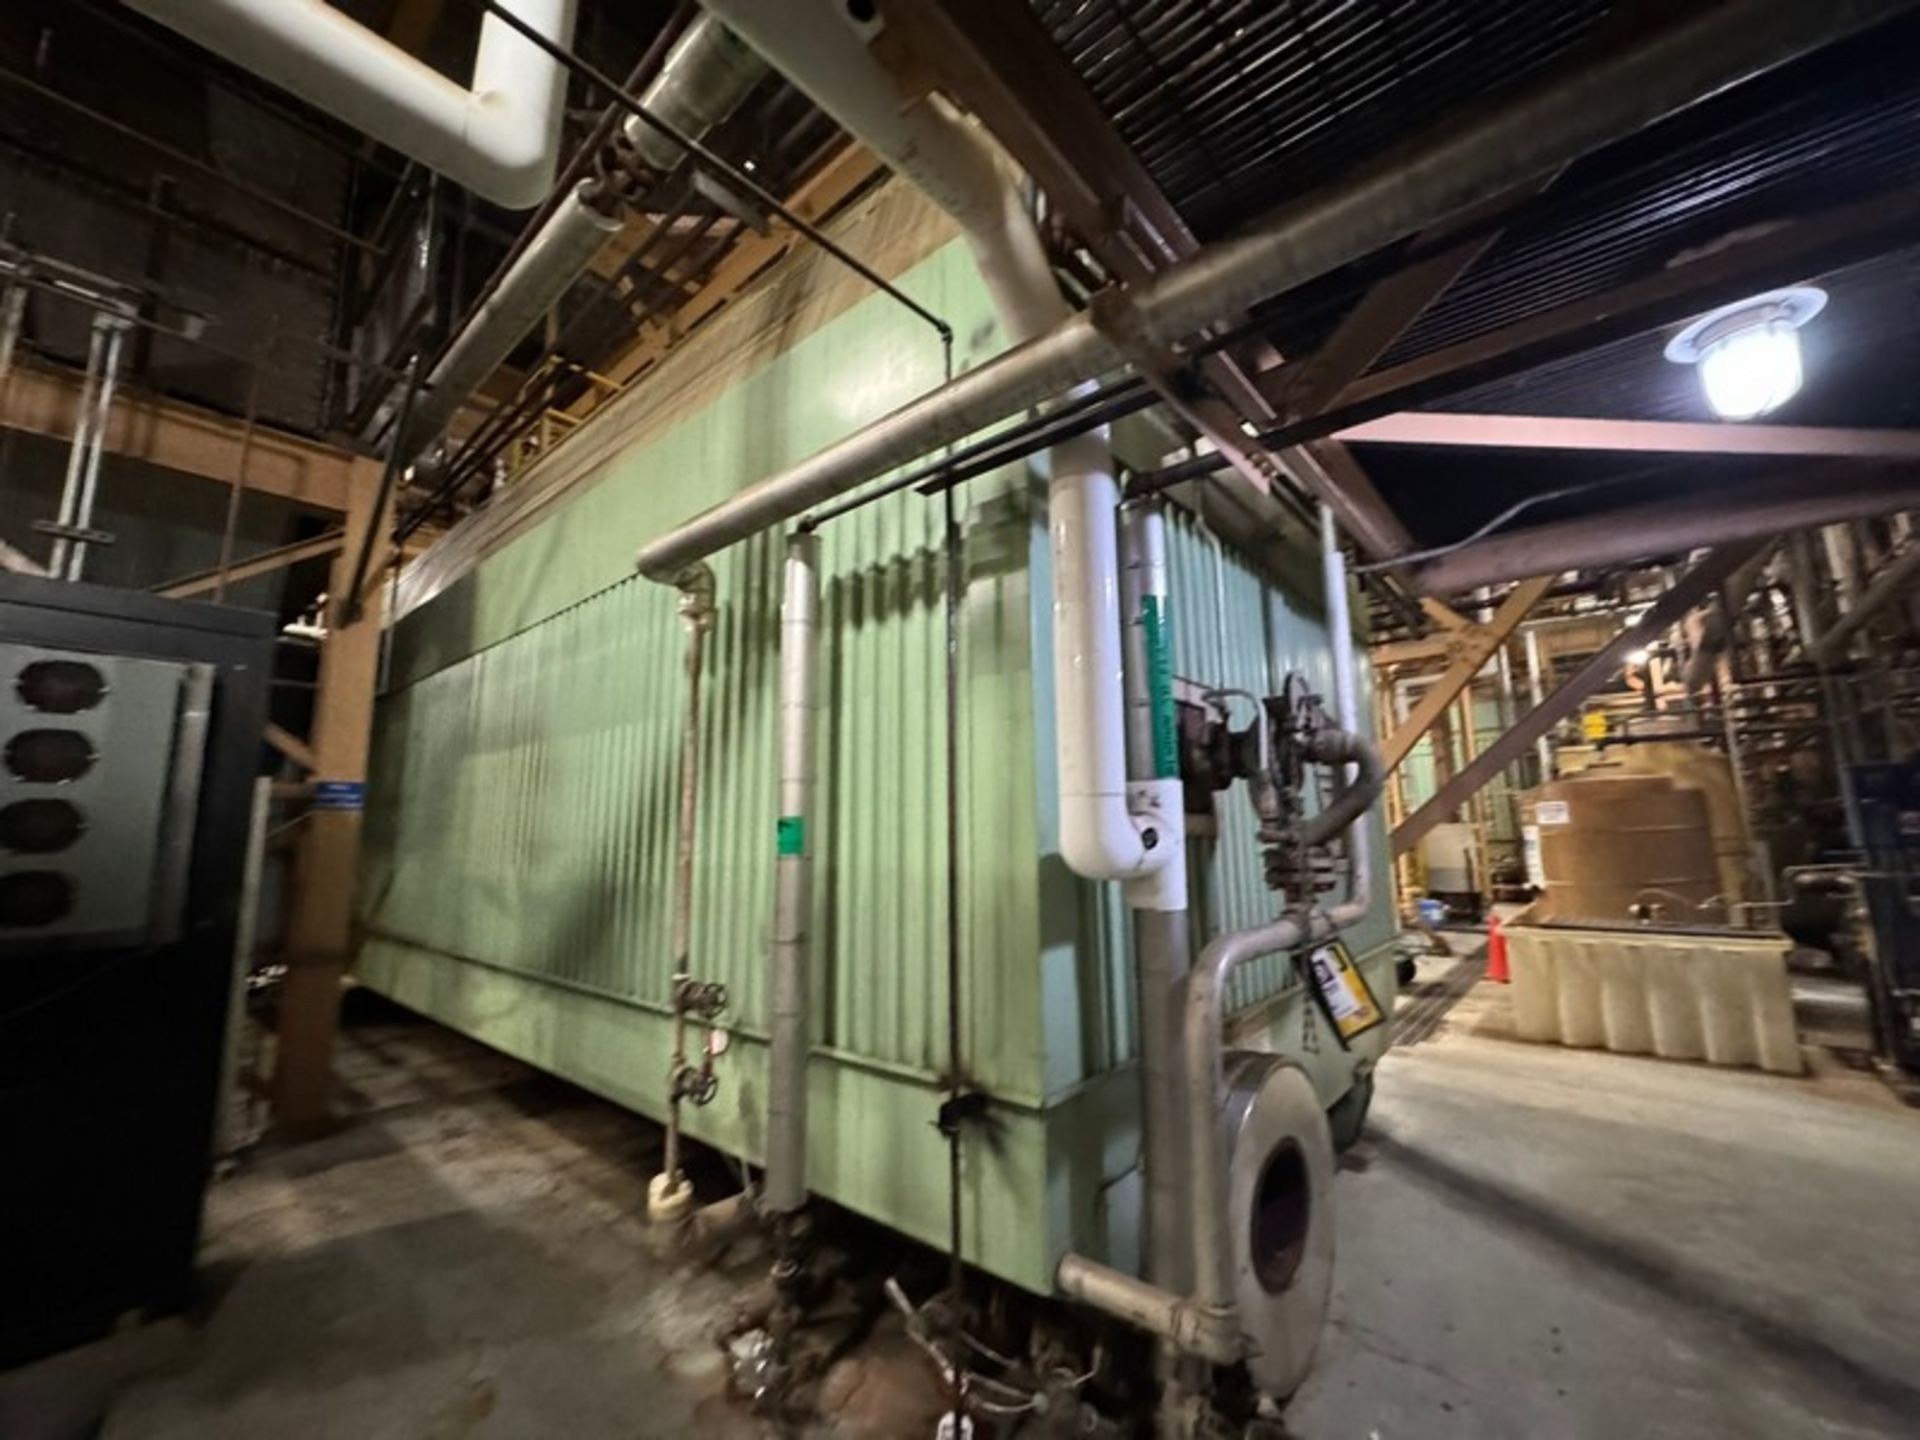 English Boiler & Tube Inc. Boiler System (LOCATED IN FREEHOLD, N.J.) (Simple Loading Fee $ TBD) - Image 9 of 10